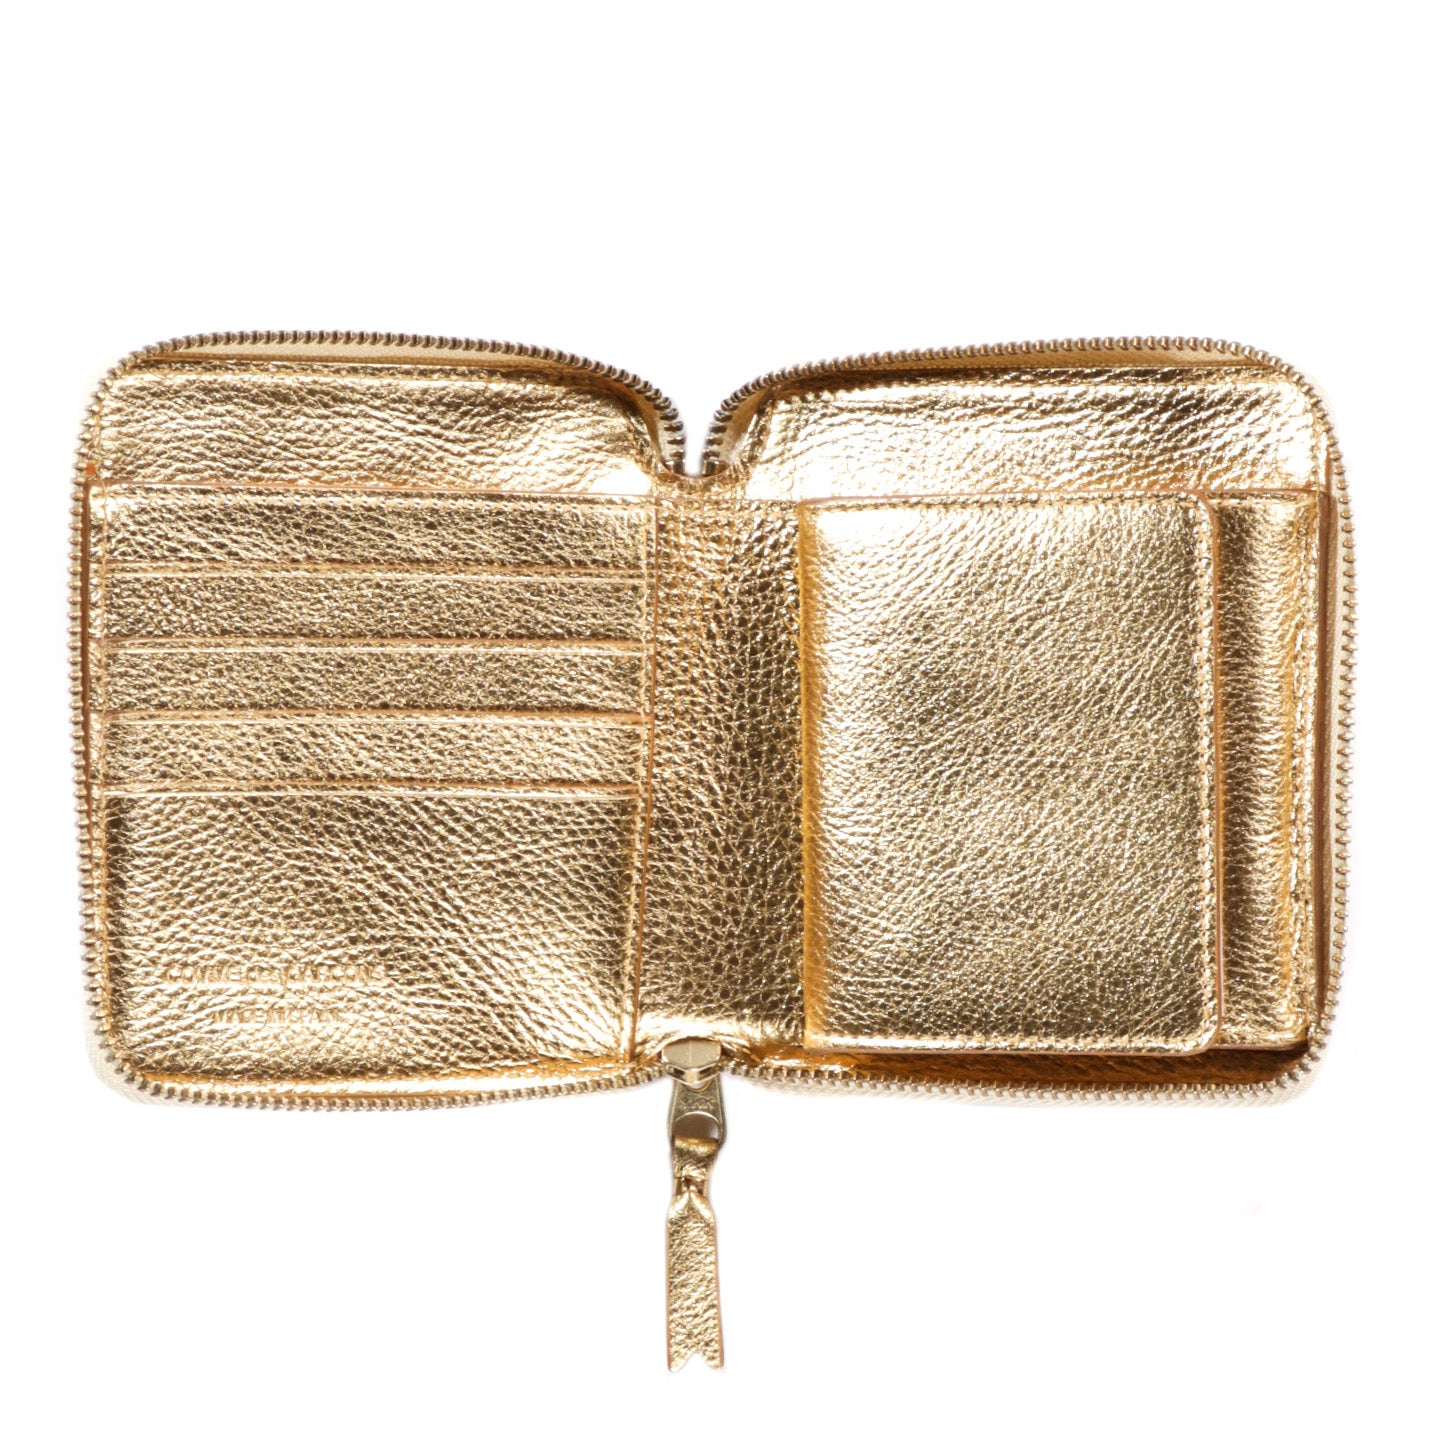 COMME DES GARCONS SA2100 EMBOSSED LOGOTYPE ZIP WALLET GOLD